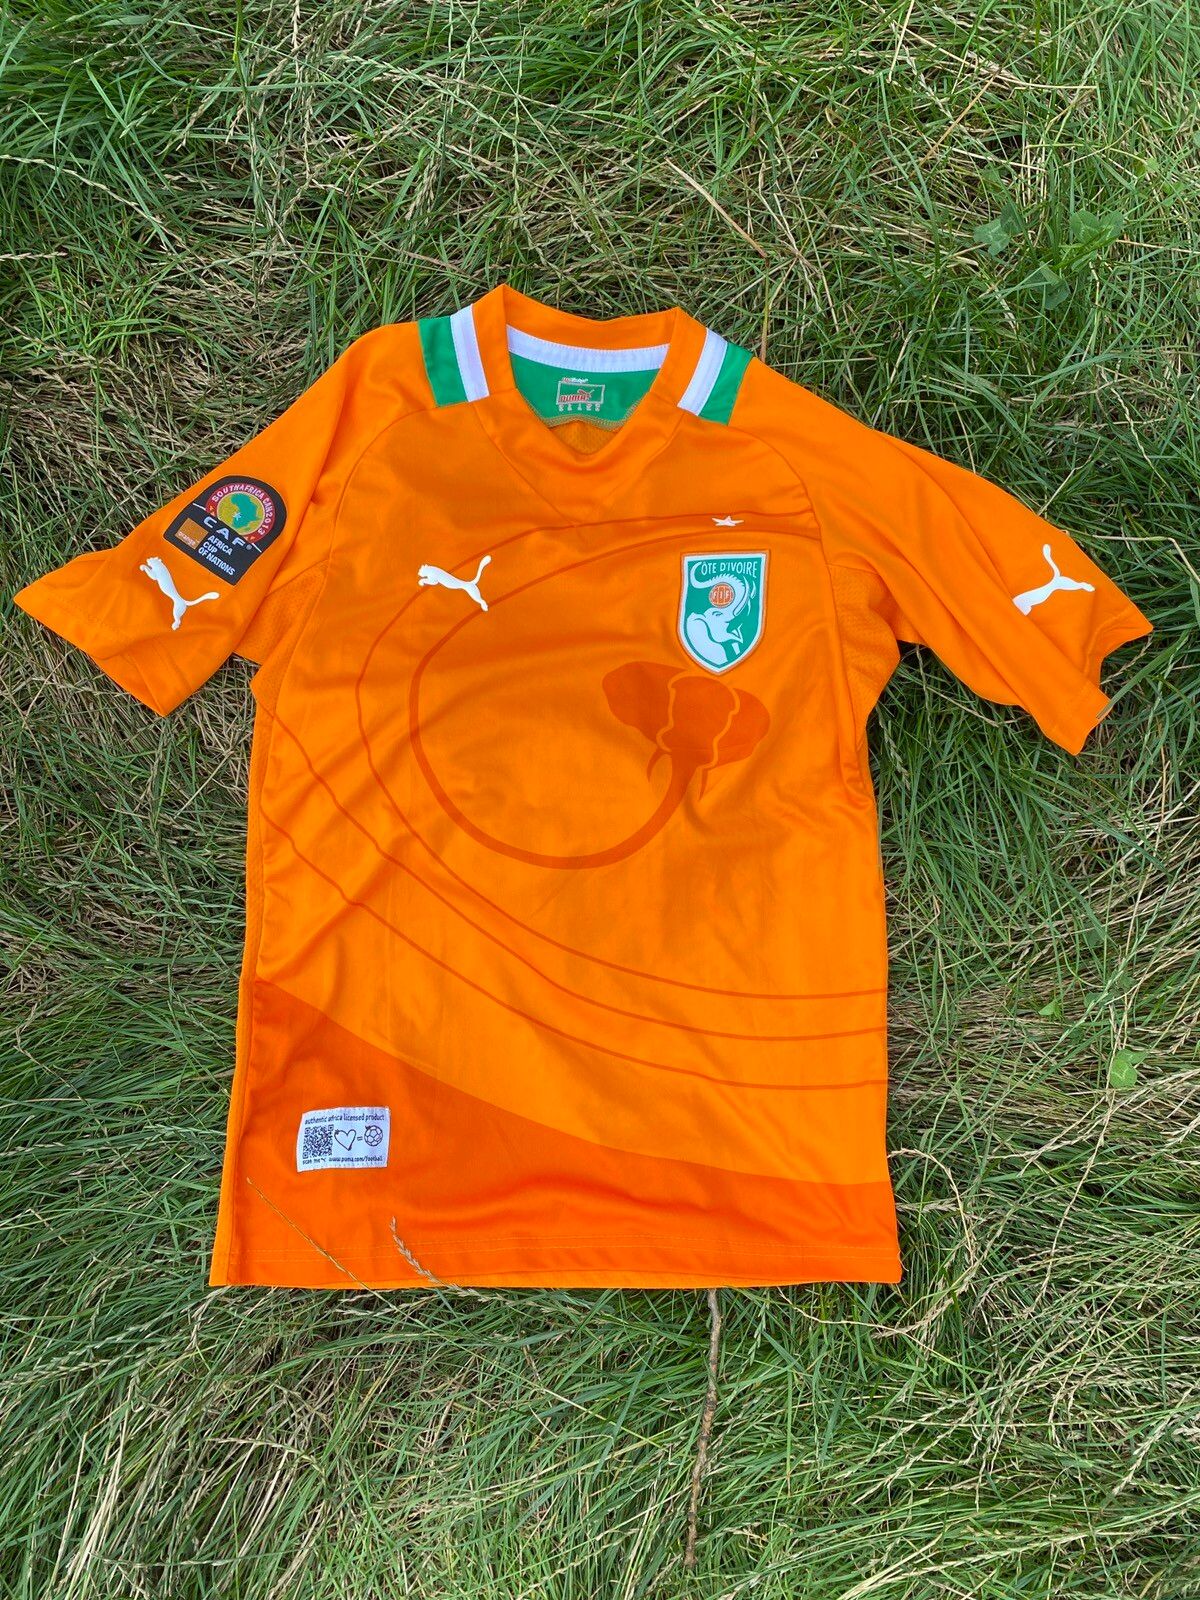 Puma Cote D’Ivoire/ Ivory Coast Africa Jersey Football Jersey Size US S / EU 44-46 / 1 - 1 Preview